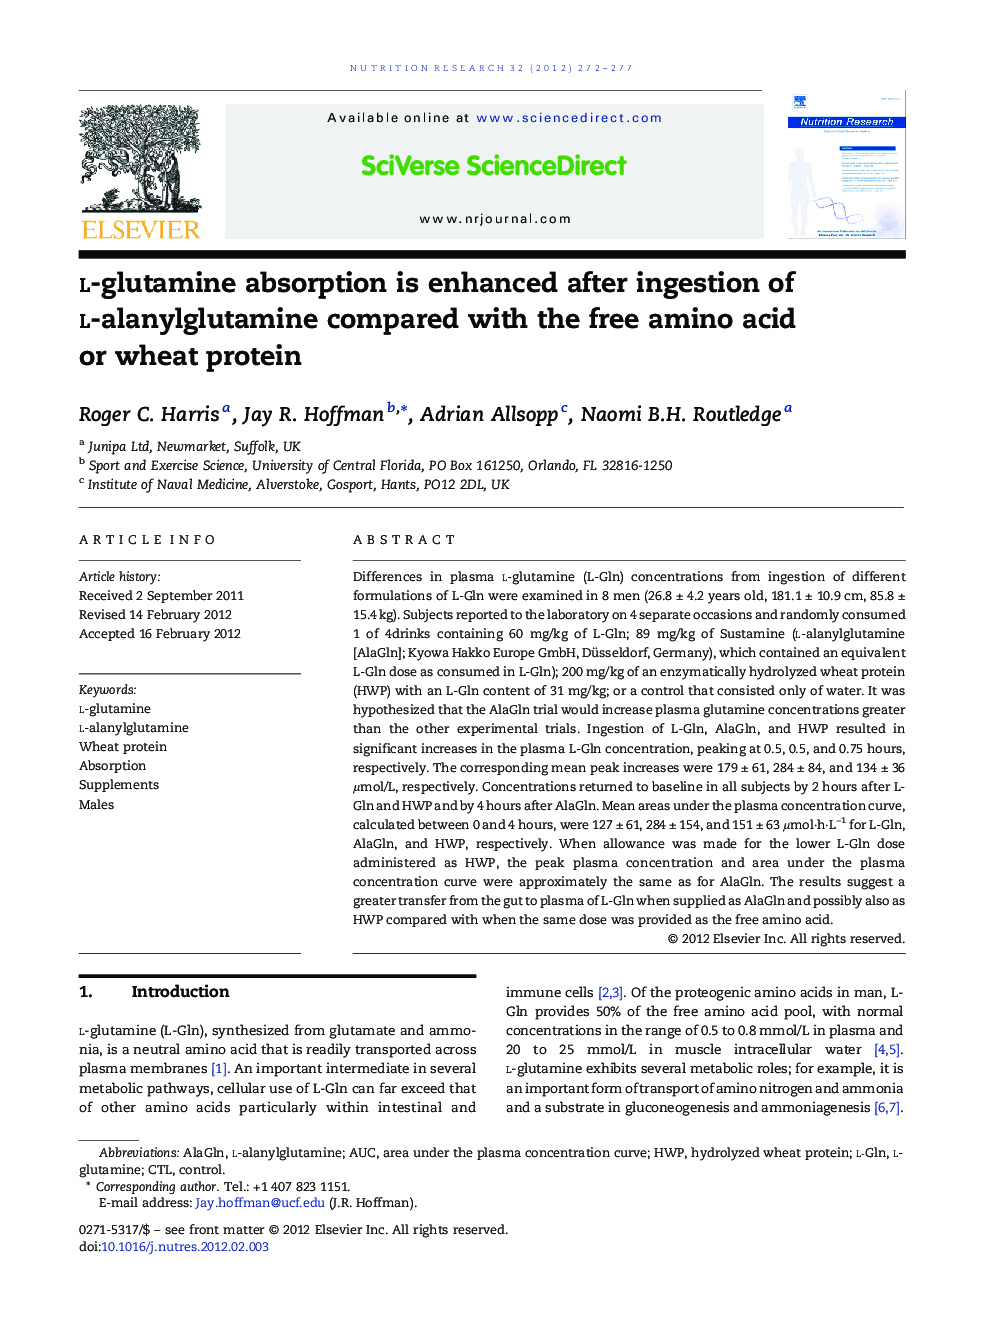 l-glutamine absorption is enhanced after ingestion of l-alanylglutamine compared with the free amino acid or wheat protein